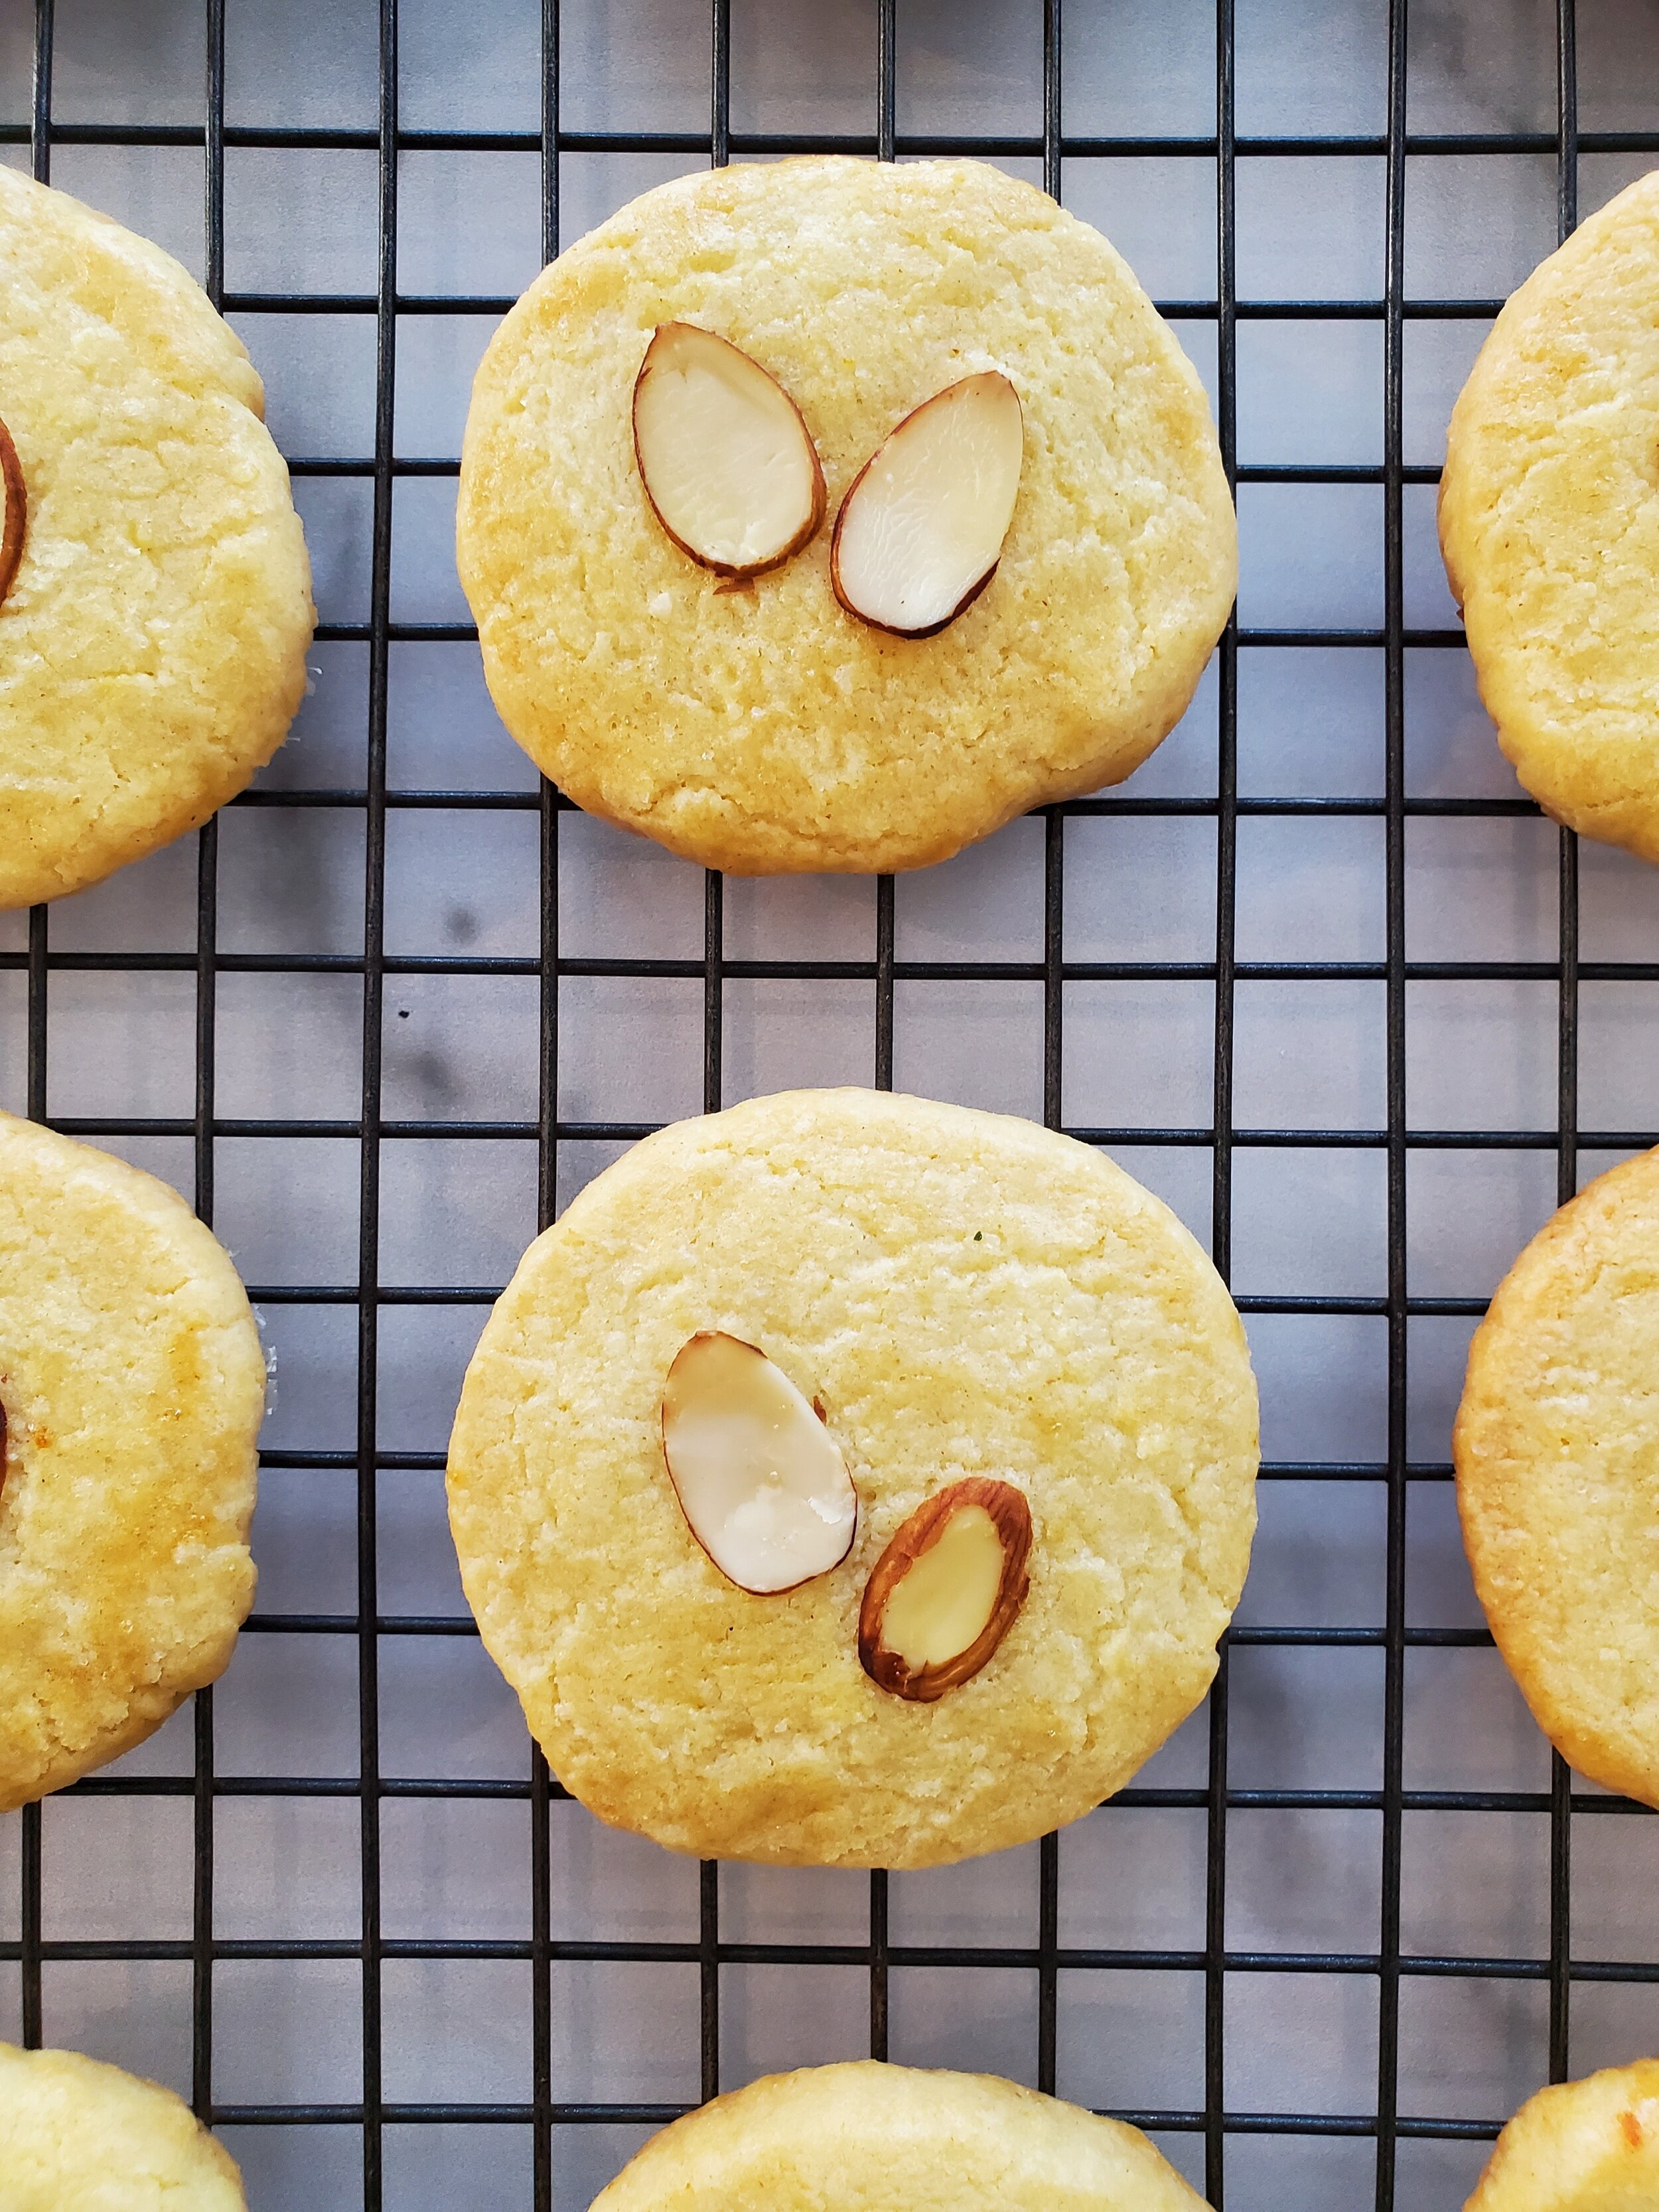 Orange Almond Cookies - The Whole Cook